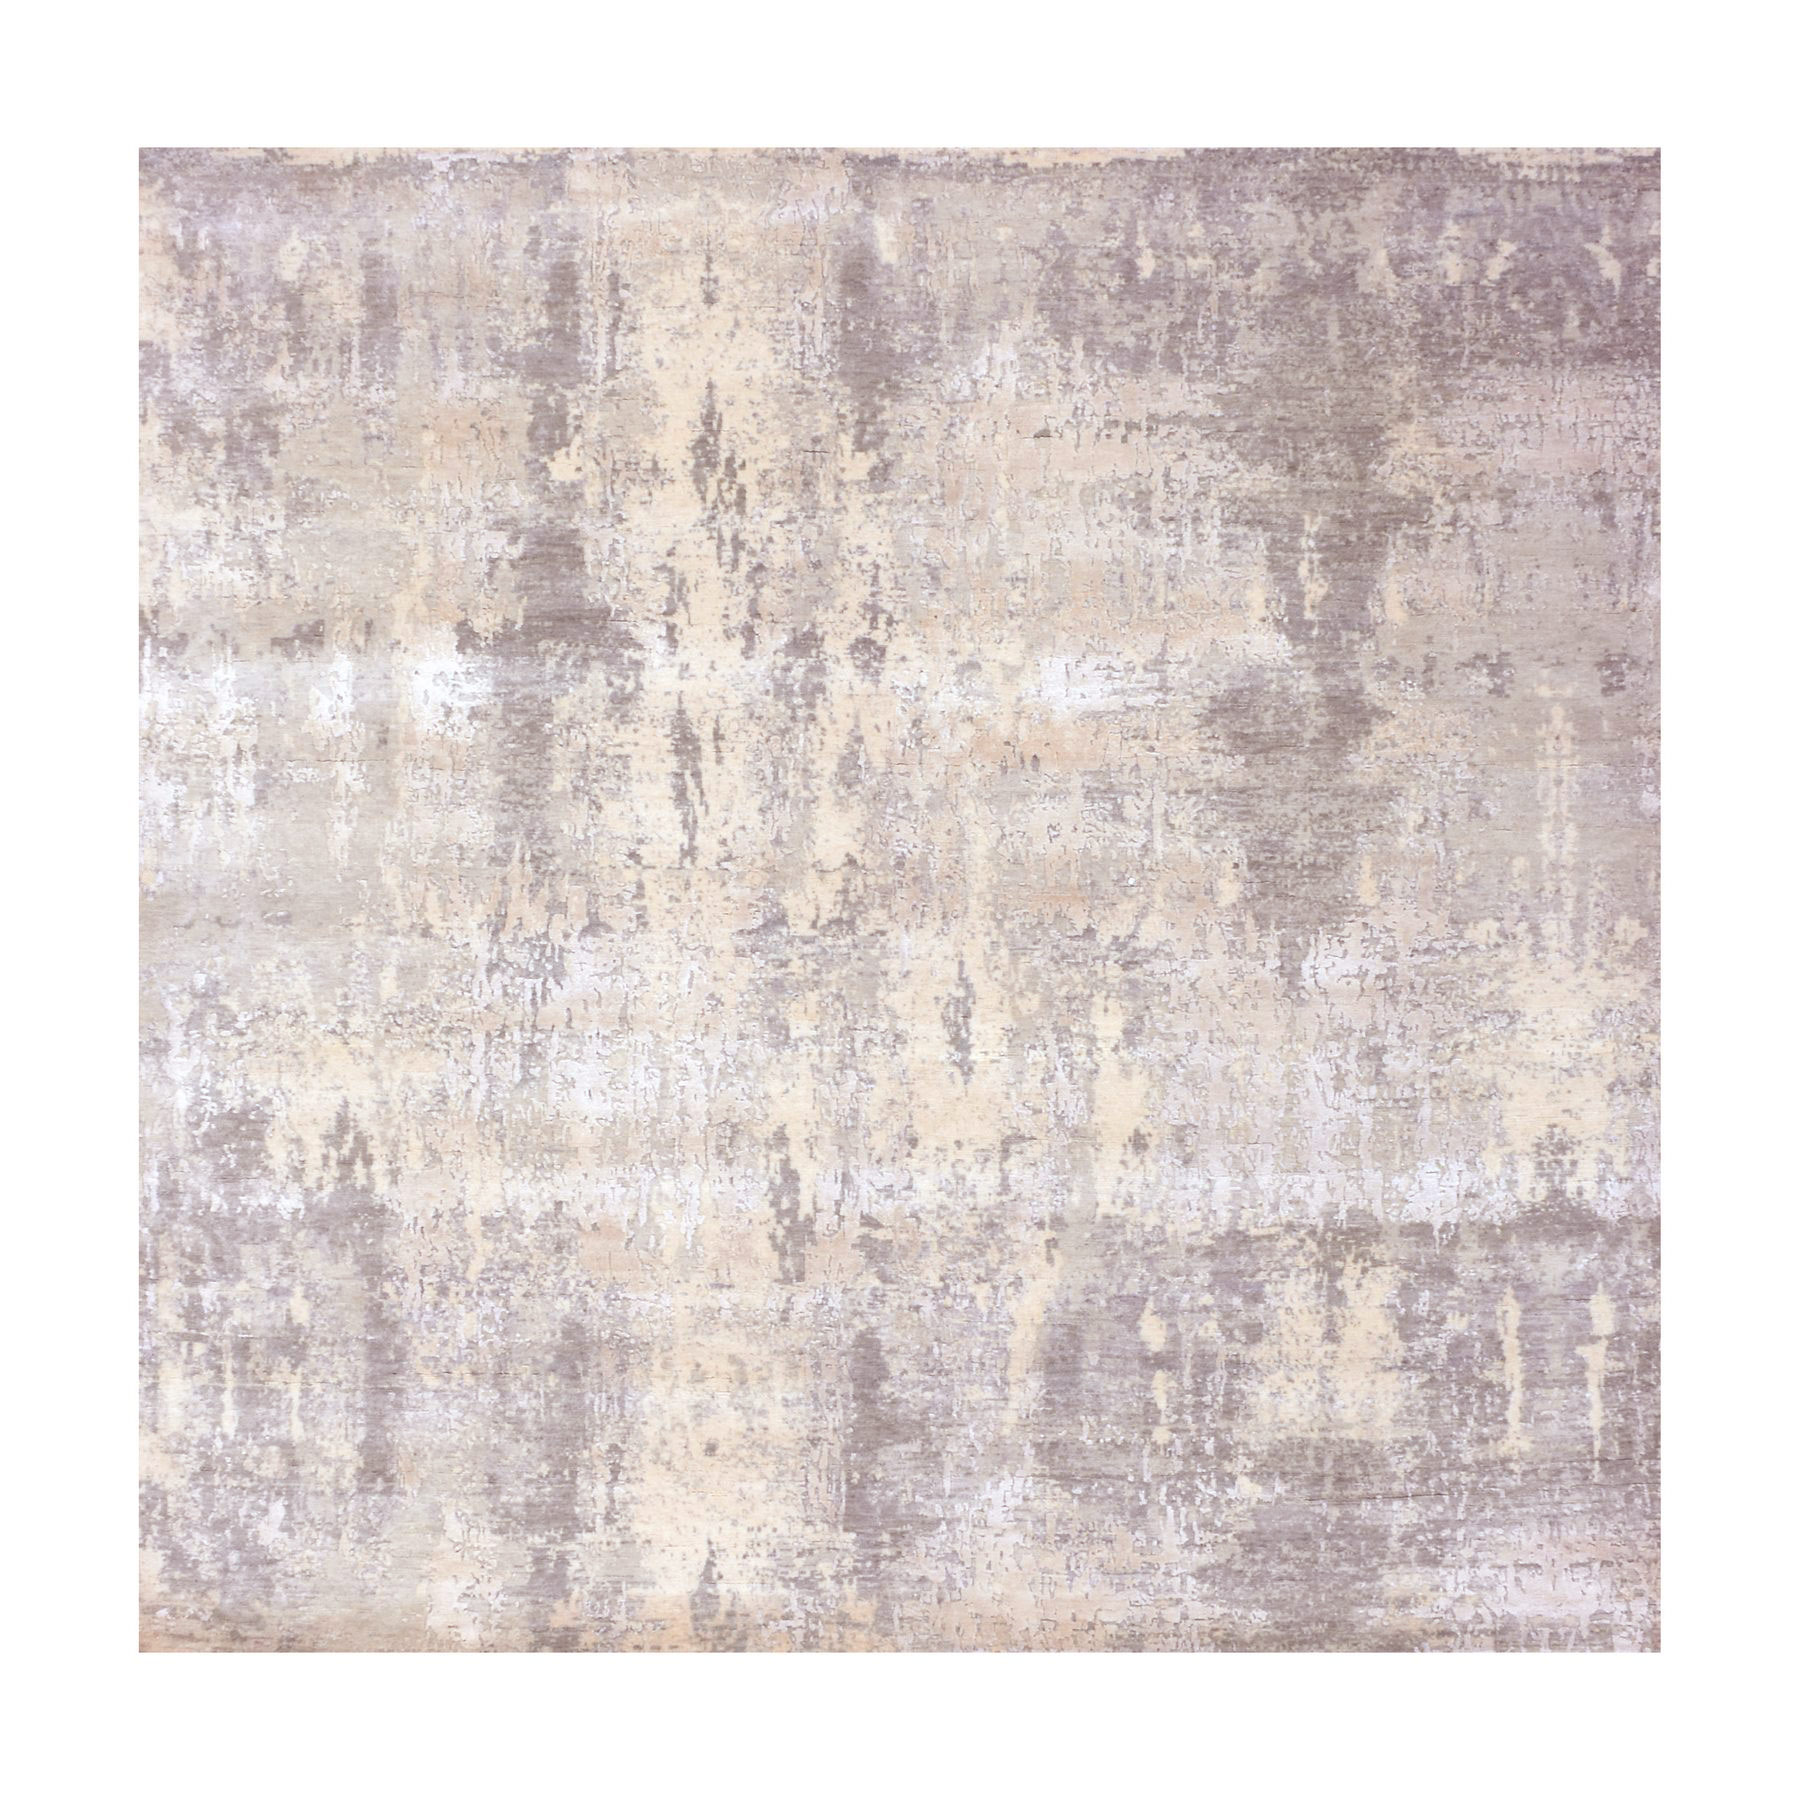 Nickel Gray With Mix Of Agreeable Gray, Soft To The Touch Pile, Hand Knotted, Modern and Abstract Design, Wool and Silk Oriental Square 